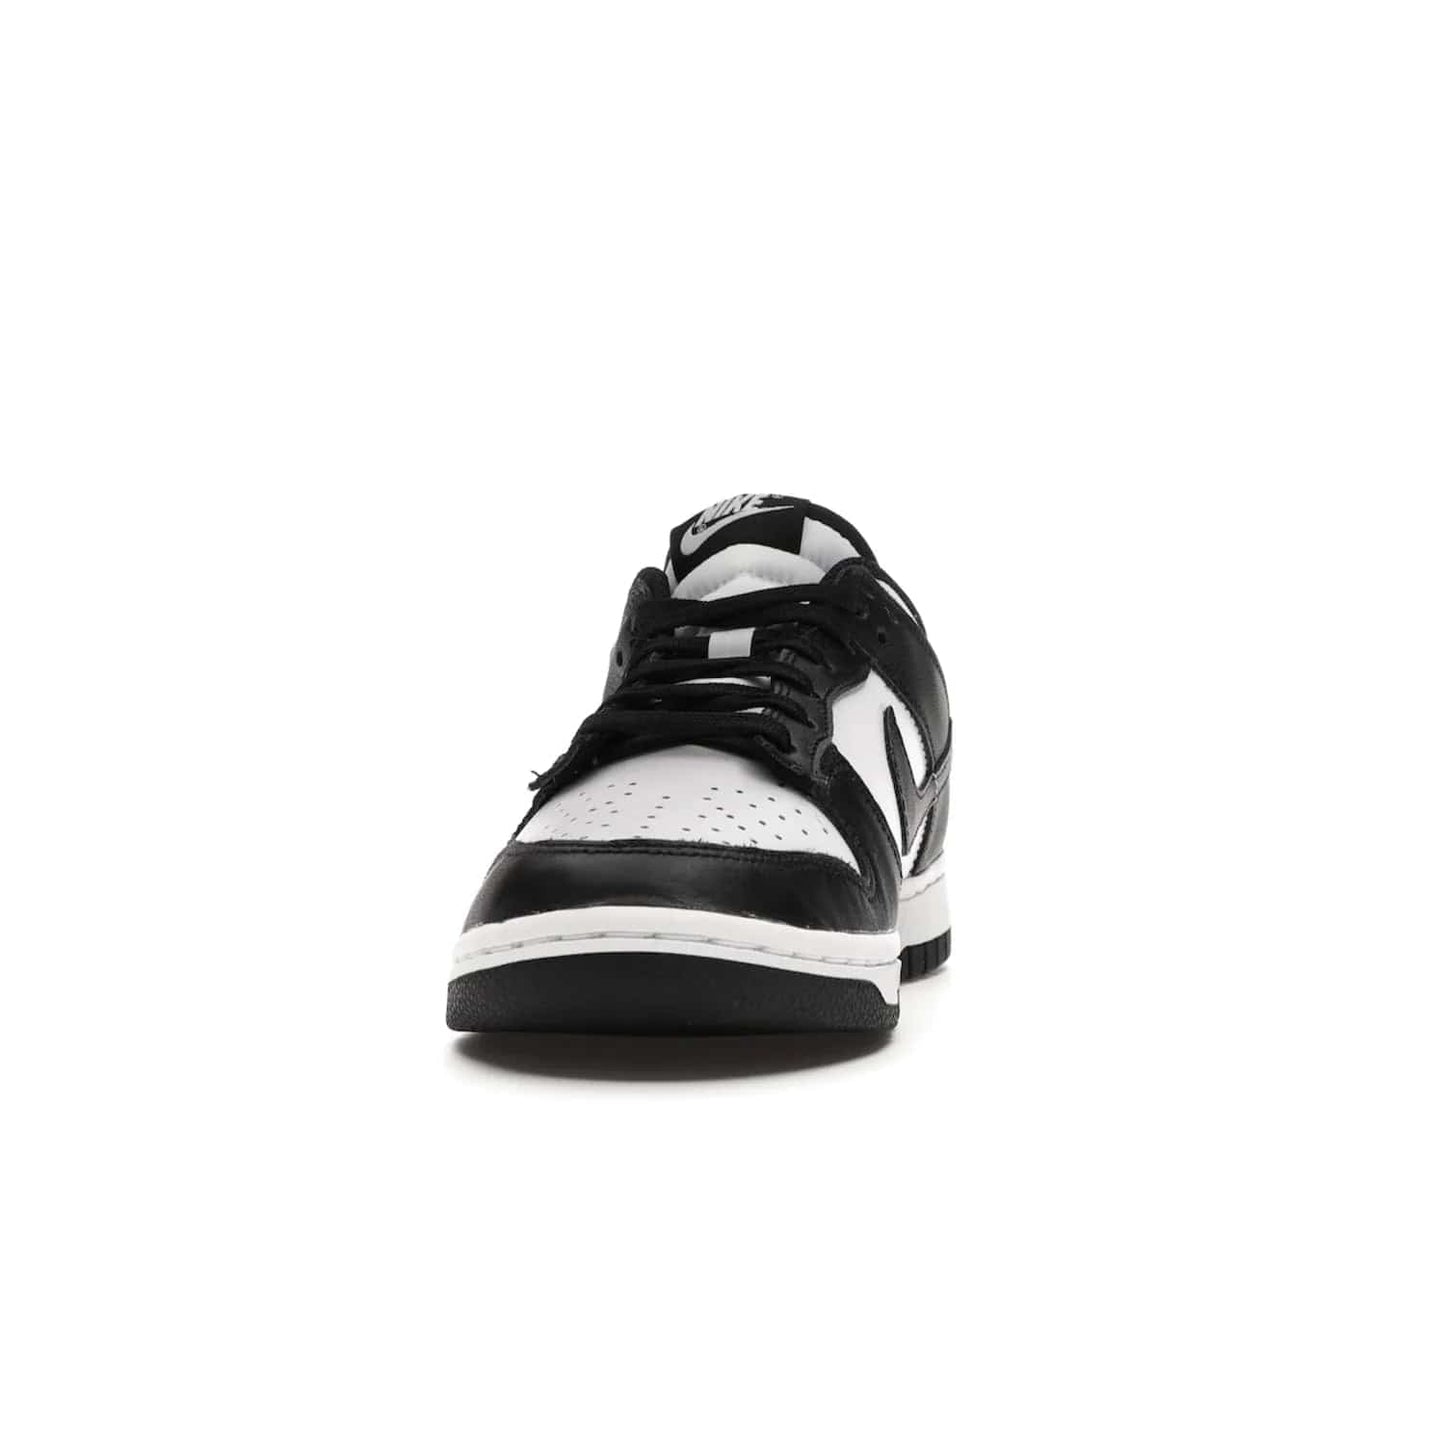 Nike Dunk Low Retro White Black Panda (2021) (Women's) - Image 11 - Only at www.BallersClubKickz.com - Say hello to the new Nike Dunk Low Retro White Black Panda (2021) (Women's)! White & black leather upper with Nike Swoosh logo. Get your pair for $100 in March 2021! Shop now!